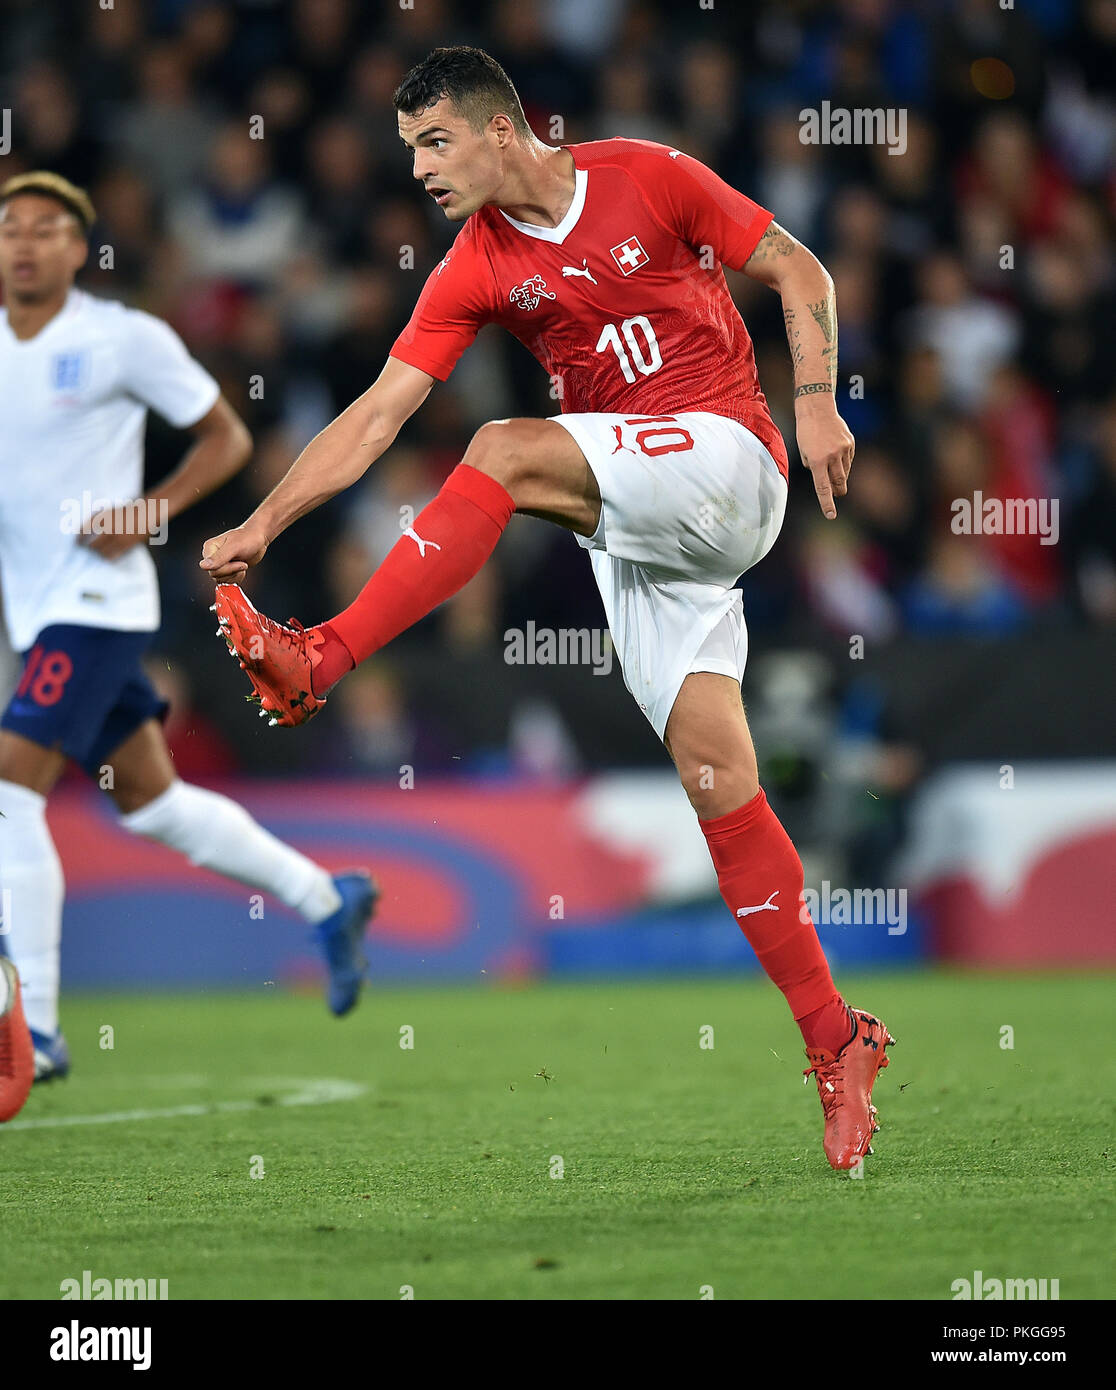 Granit Xhaka of Switzerland ENGLAND V SWITZERLAND INTERNATIONAL FRIENDLY ENGLAND V SWITZERLAND INTERNATIONAL FRIENDLY 11 September 2018 GBC12081 STRICTLY EDITORIAL USE ONLY. If The Player/Players Depicted In This Image Is/Are Playing For An English Club Or The England National Team. Then This Image May Only Be Used For Editorial Purposes. No Commercial Use. The Following Usages Are Also Restricted EVEN IF IN AN EDITORIAL CONTEXT: Use in conjuction with, or part of, any unauthorized audio, video, data, fixture lists, club/league logos, Betting, Games or any 'live' services. Stock Photo